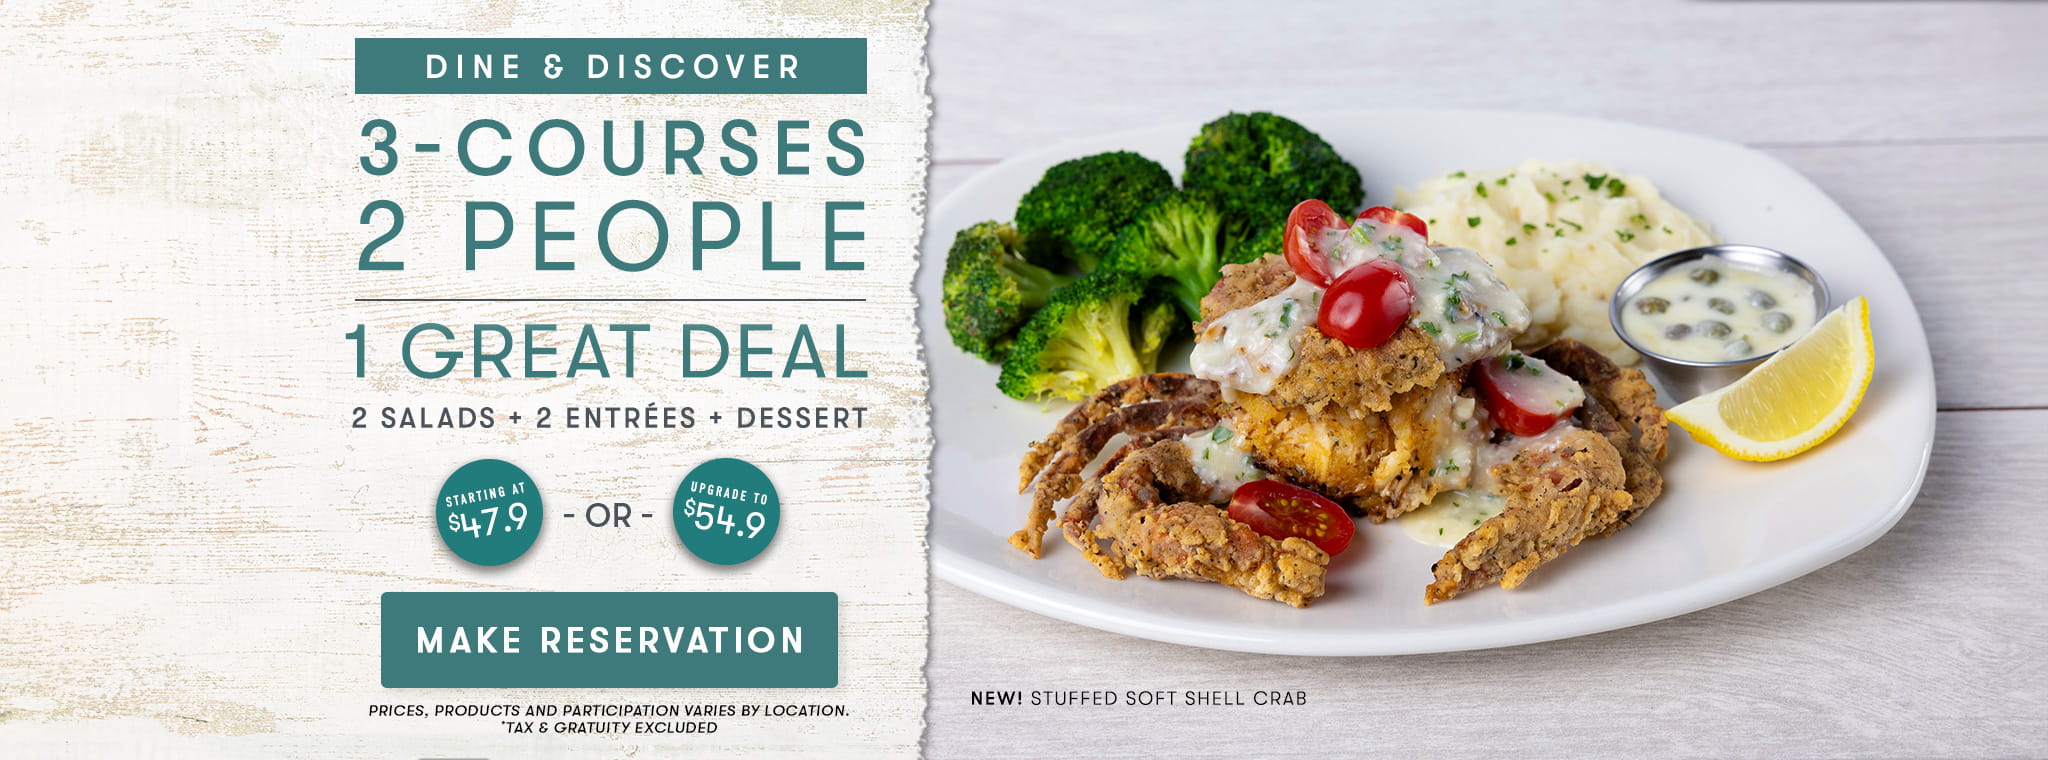 Dine & Discover - 3-Courses, 2 People, 1 Great Deal